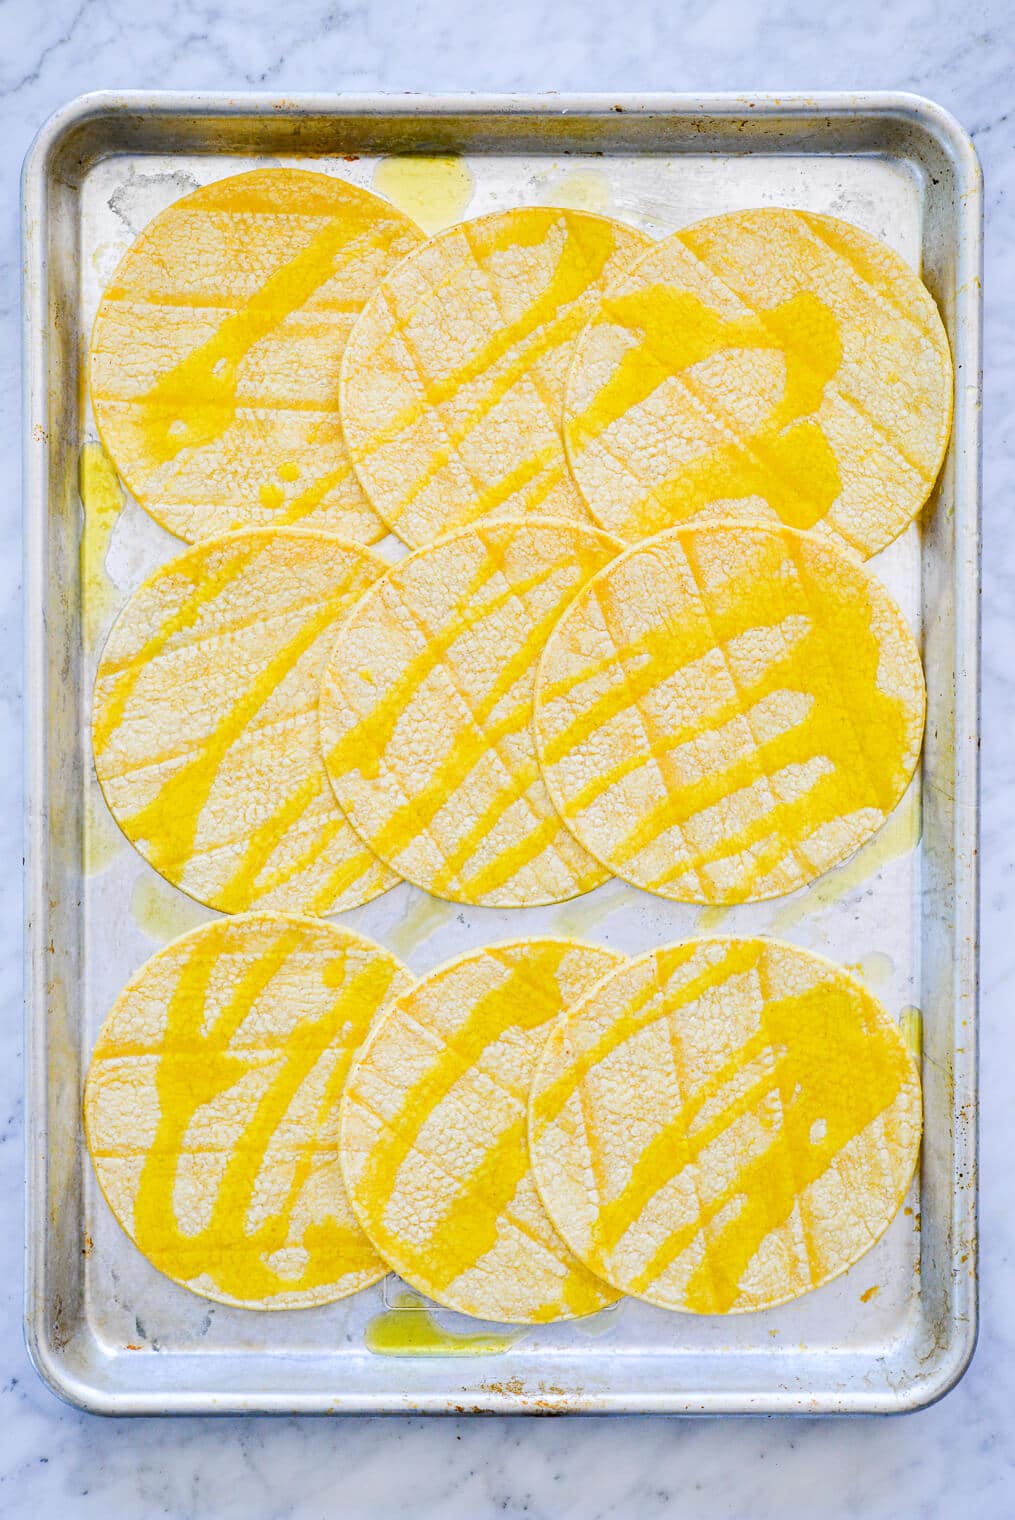 Sheet pan with three rows of three corn tortillas drizzled with olive oil.